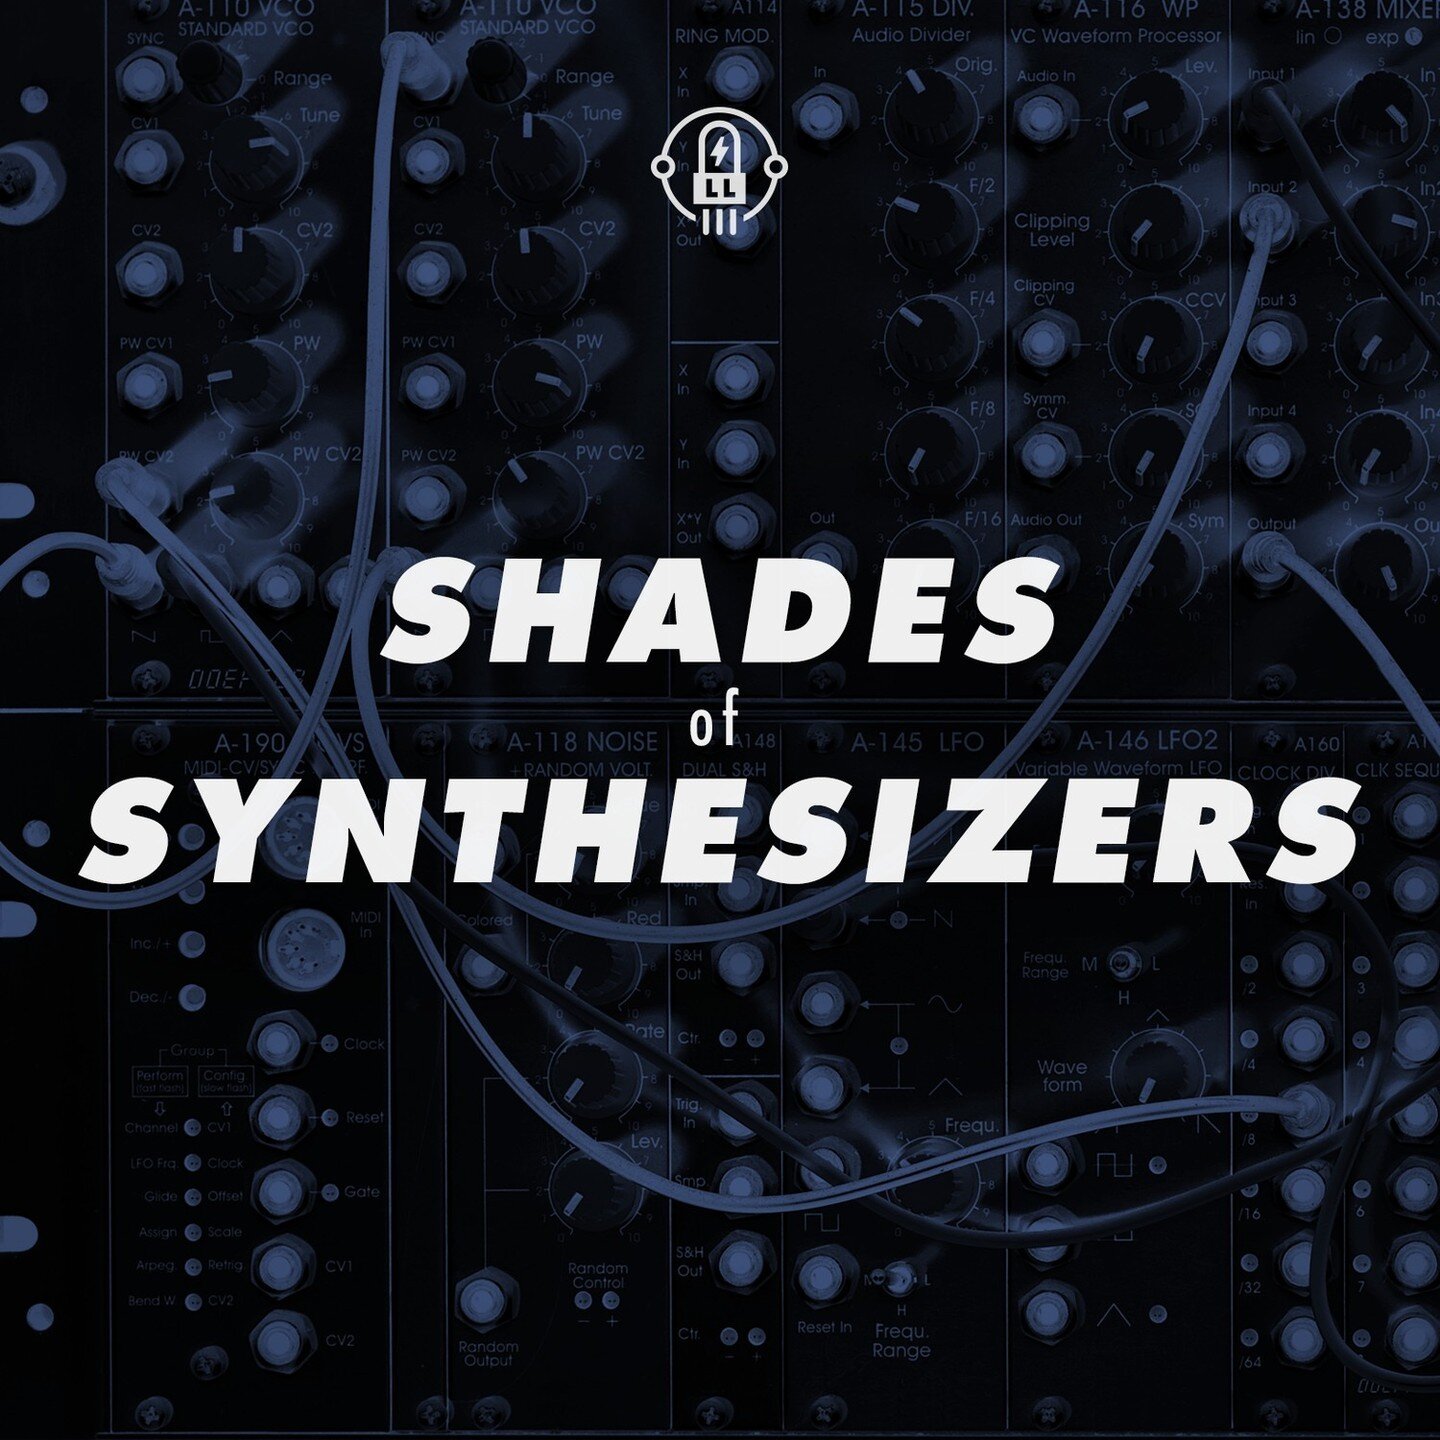 The synthesizer ain&rsquo;t just for the 80s anymore&hellip; though it certainly can be that too.

We&rsquo;ve patched together a few albums that feature the many Shades of Synthesizers, pulling albums from our Eyeballs &amp; Eardrums label that show